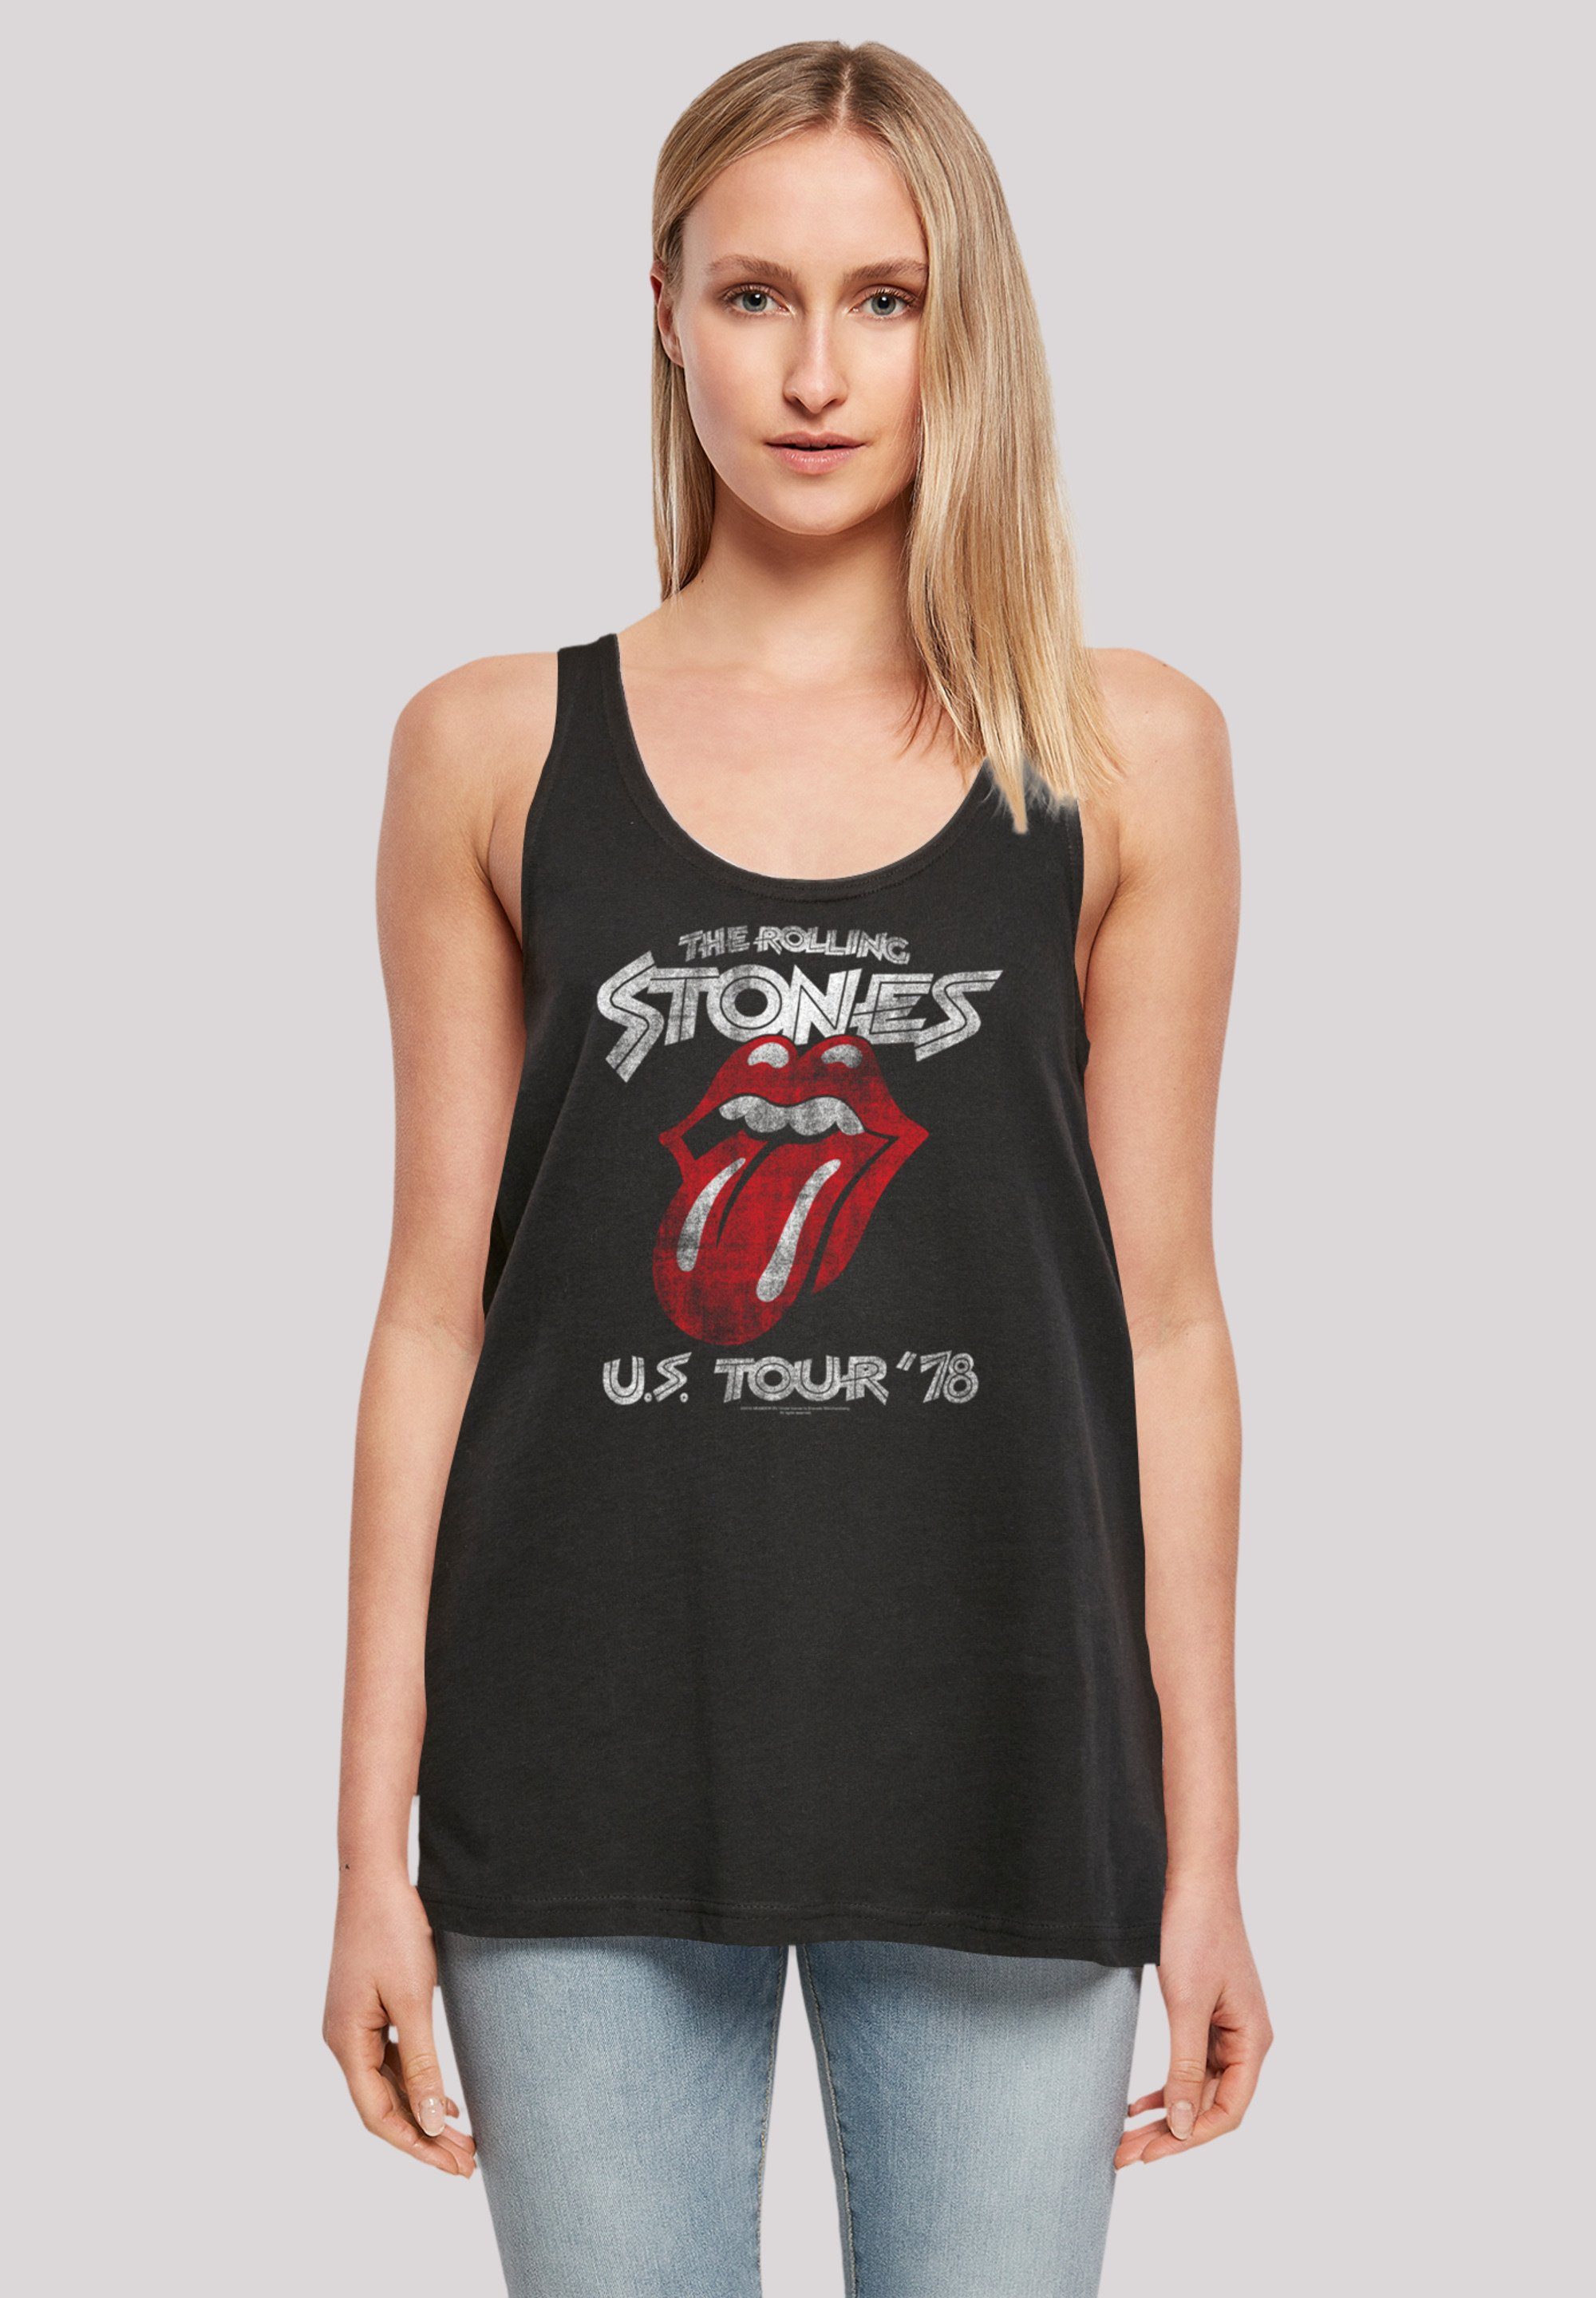 Tanktop T-Shirt The Stones Rolling The \'78 lizenziertes US F4NT4STIC Stones Offiziell Rolling Tour Print,